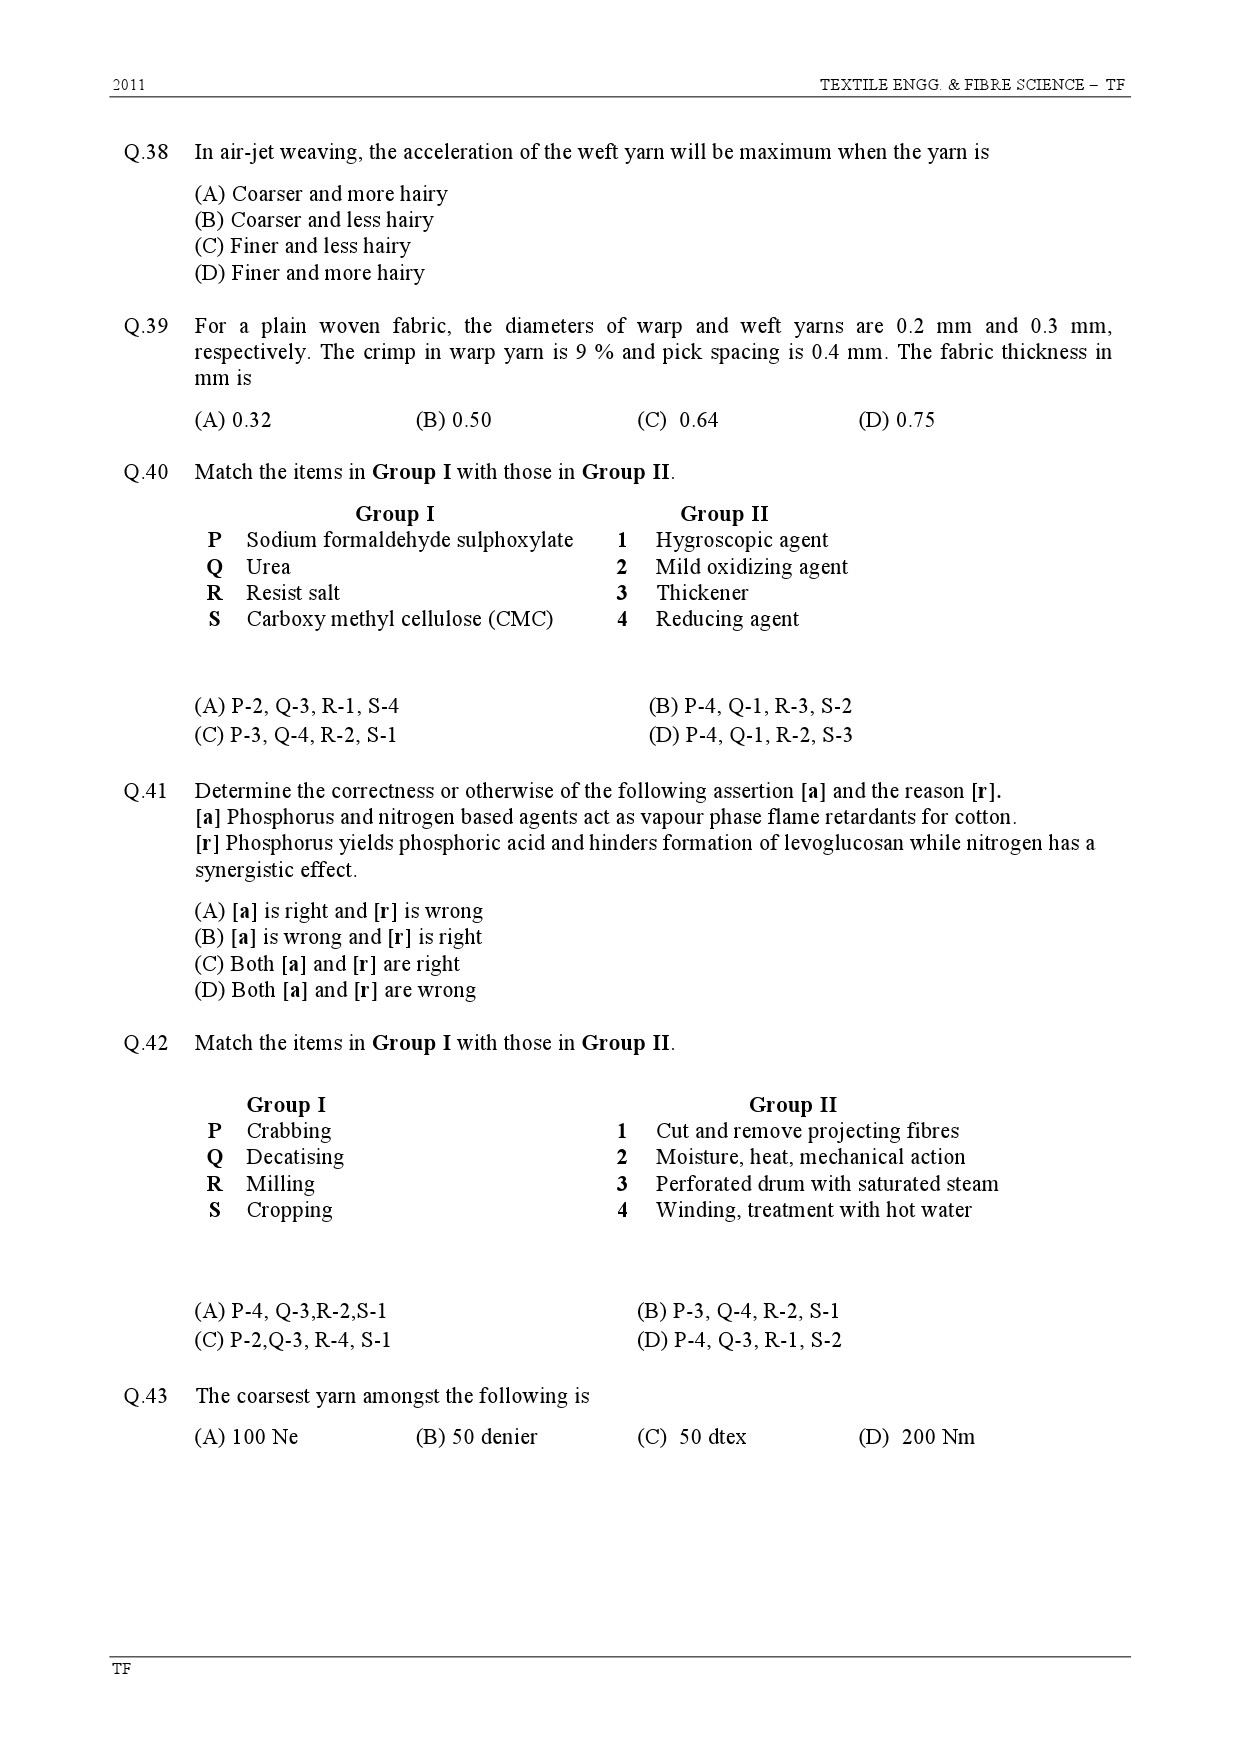 GATE Exam Question Paper 2011 Textile Engineering and Fibre Science 7